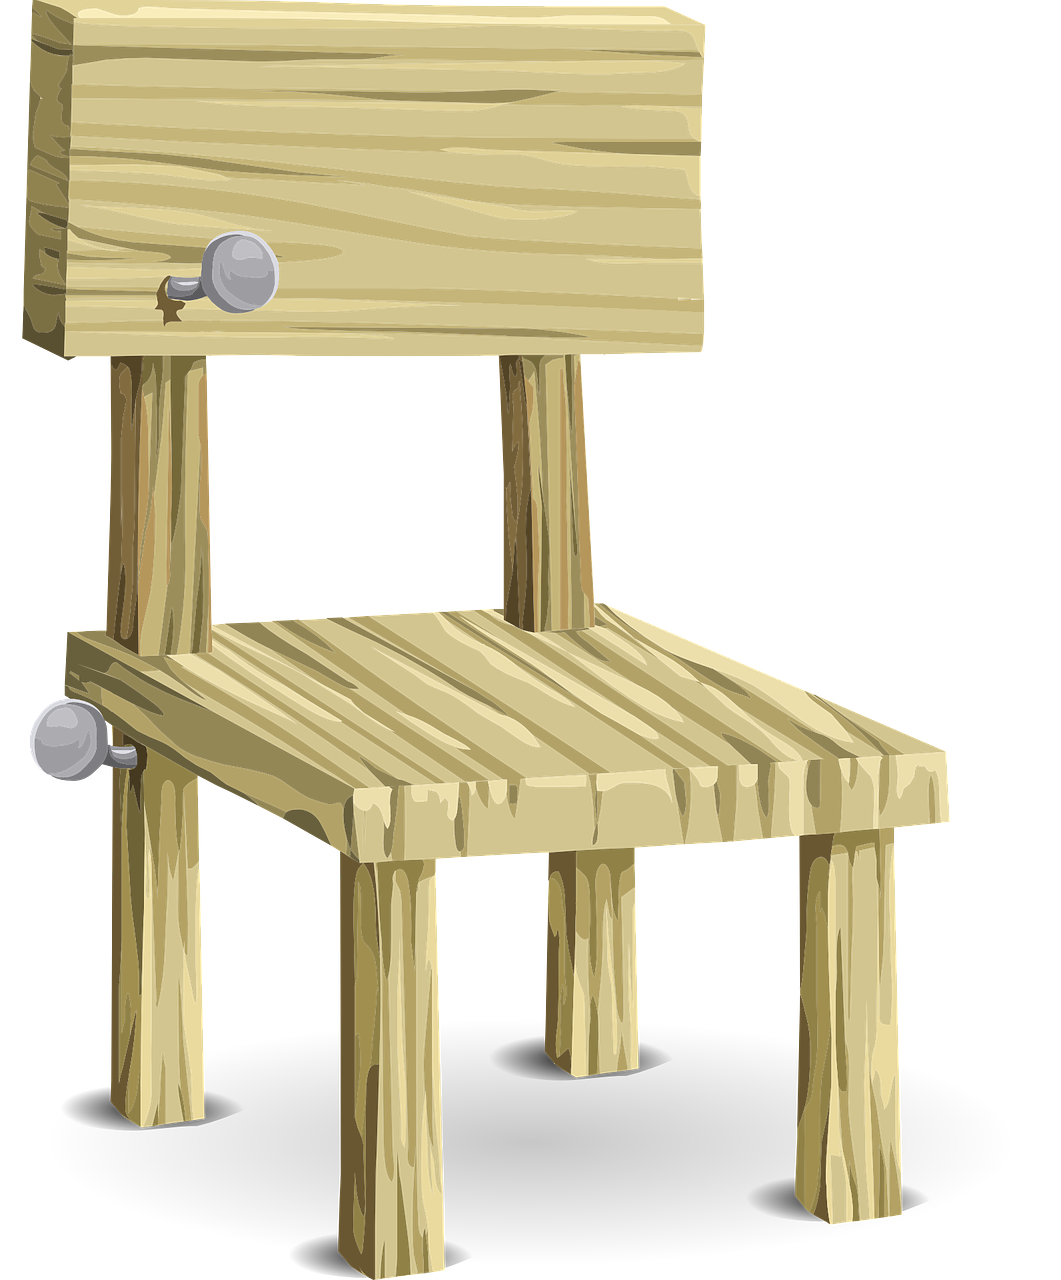 chairs wooden furniture free photo